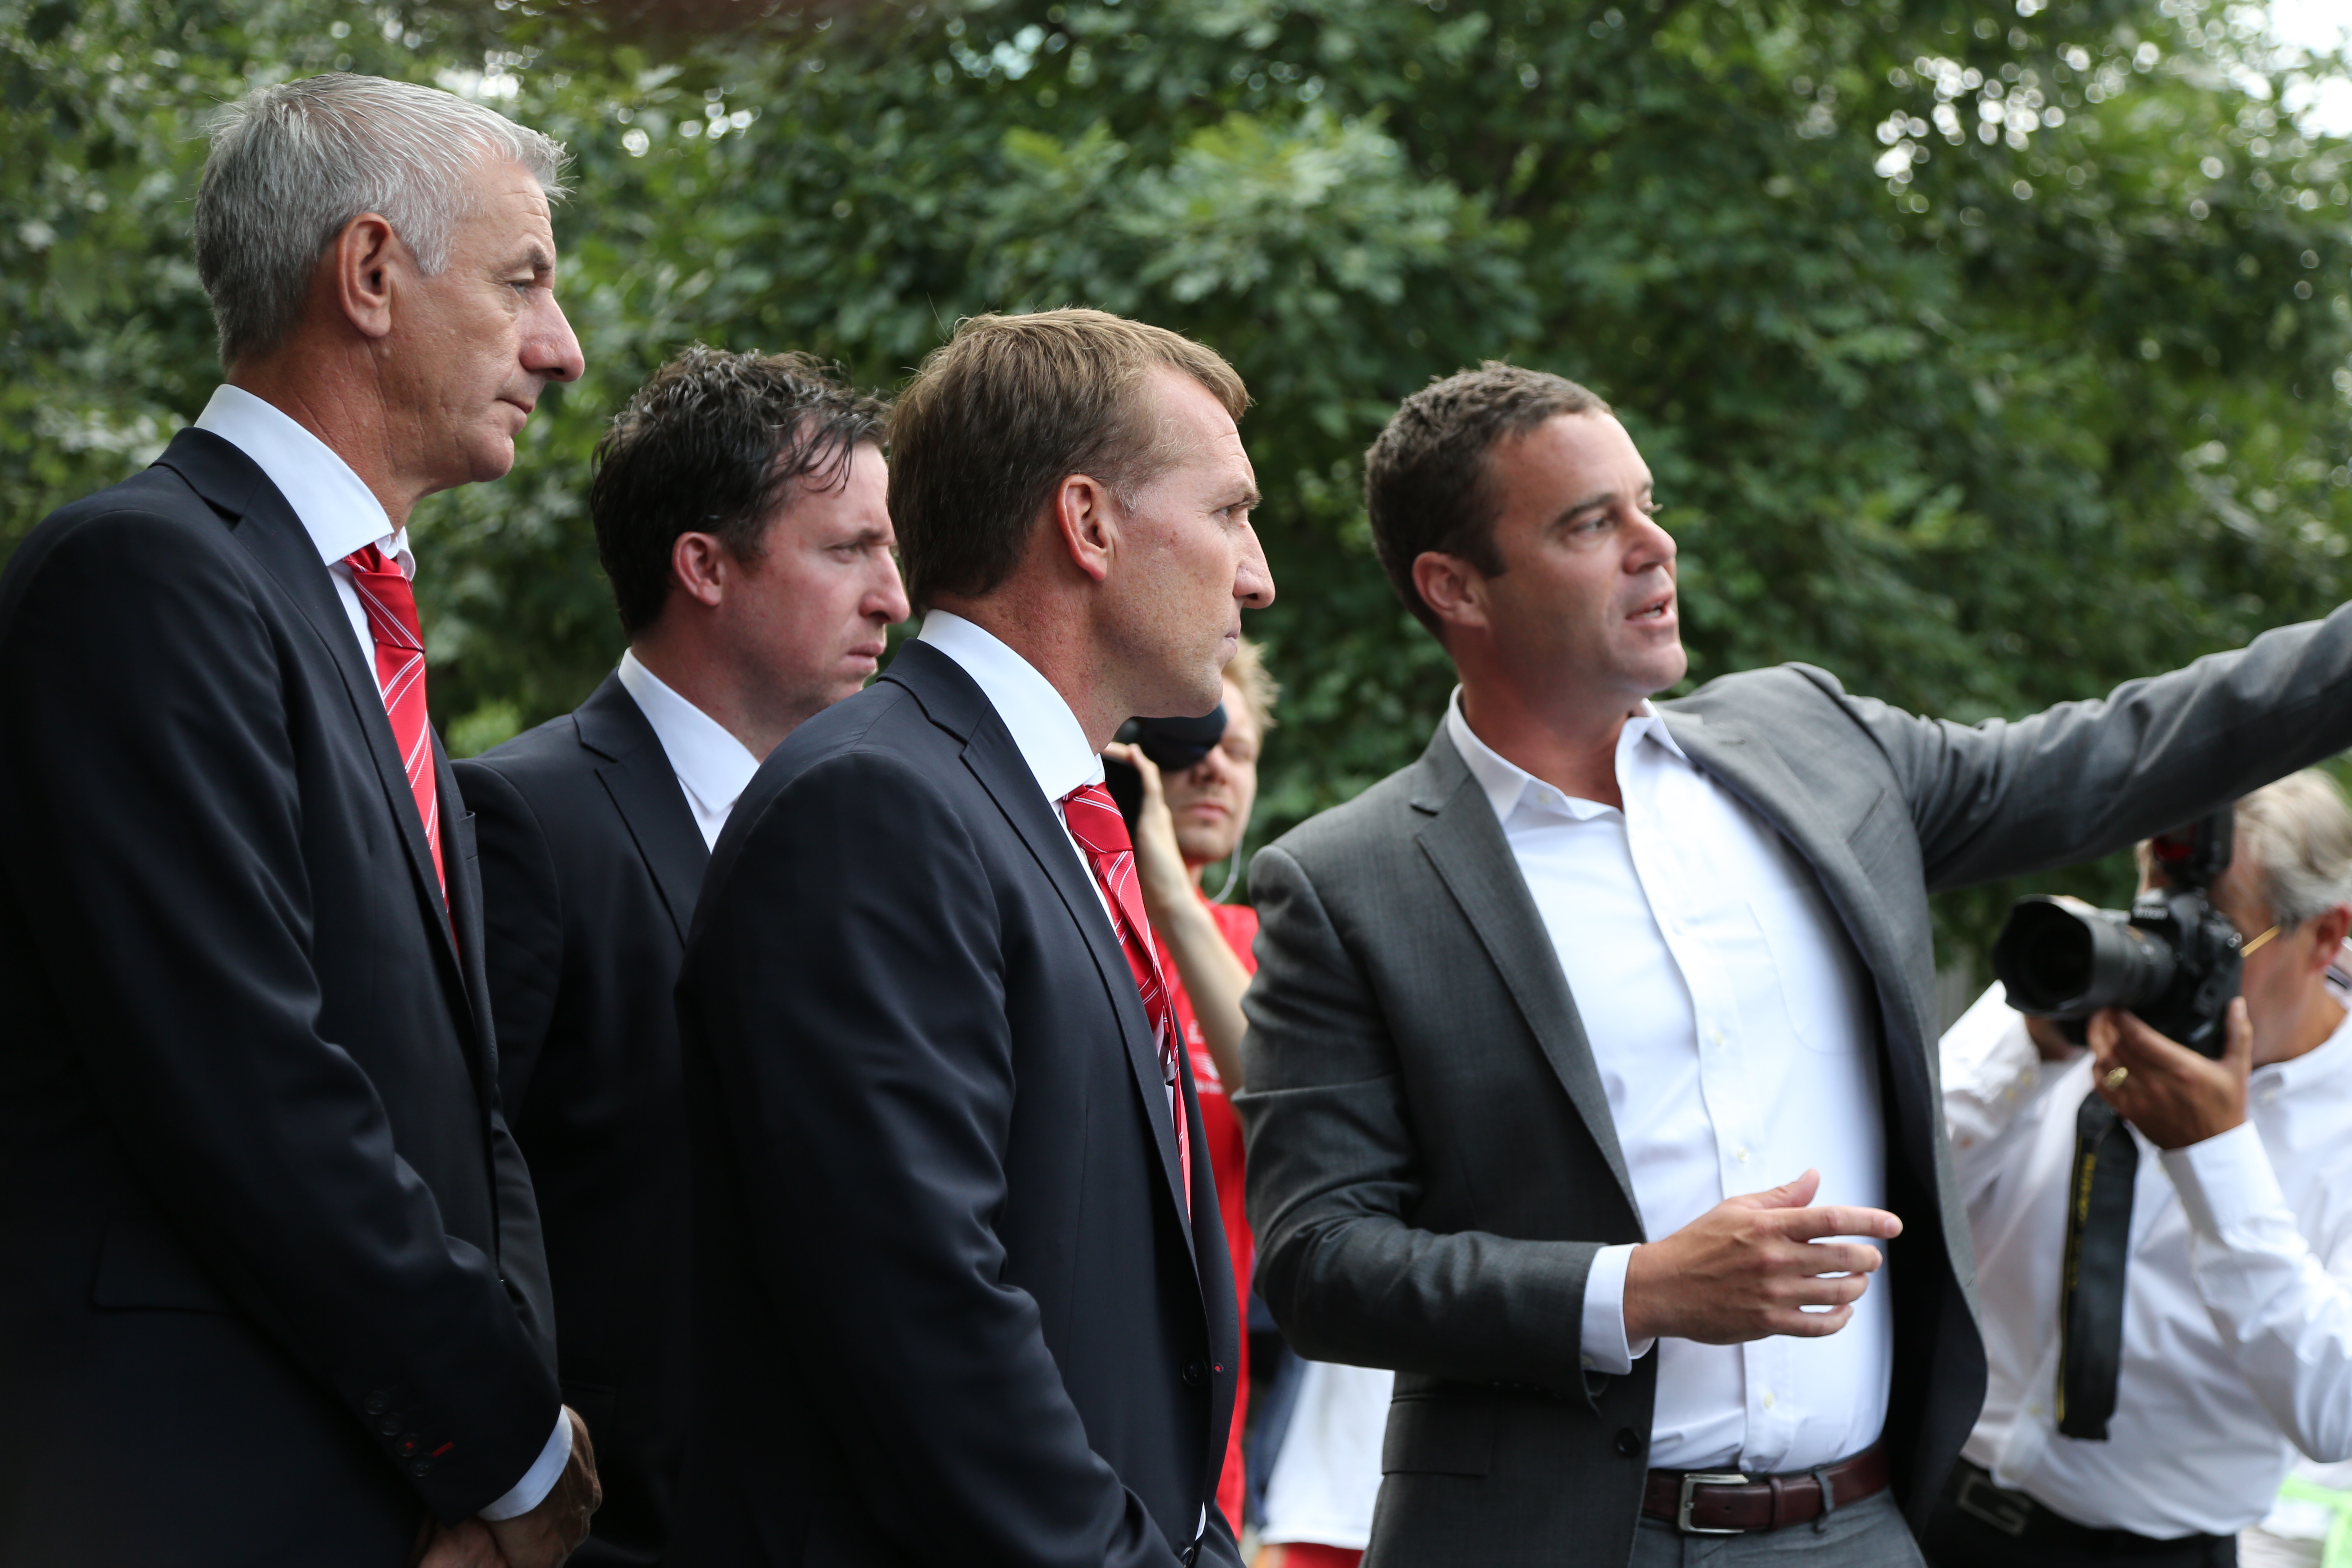 Liverpool soccer players Ian Rush, Robbie Fowler and Brendan Rodgers stand next to 9/11 Memorial President Joe Daniels as Daniels points to something out of view on Memorial plaza.